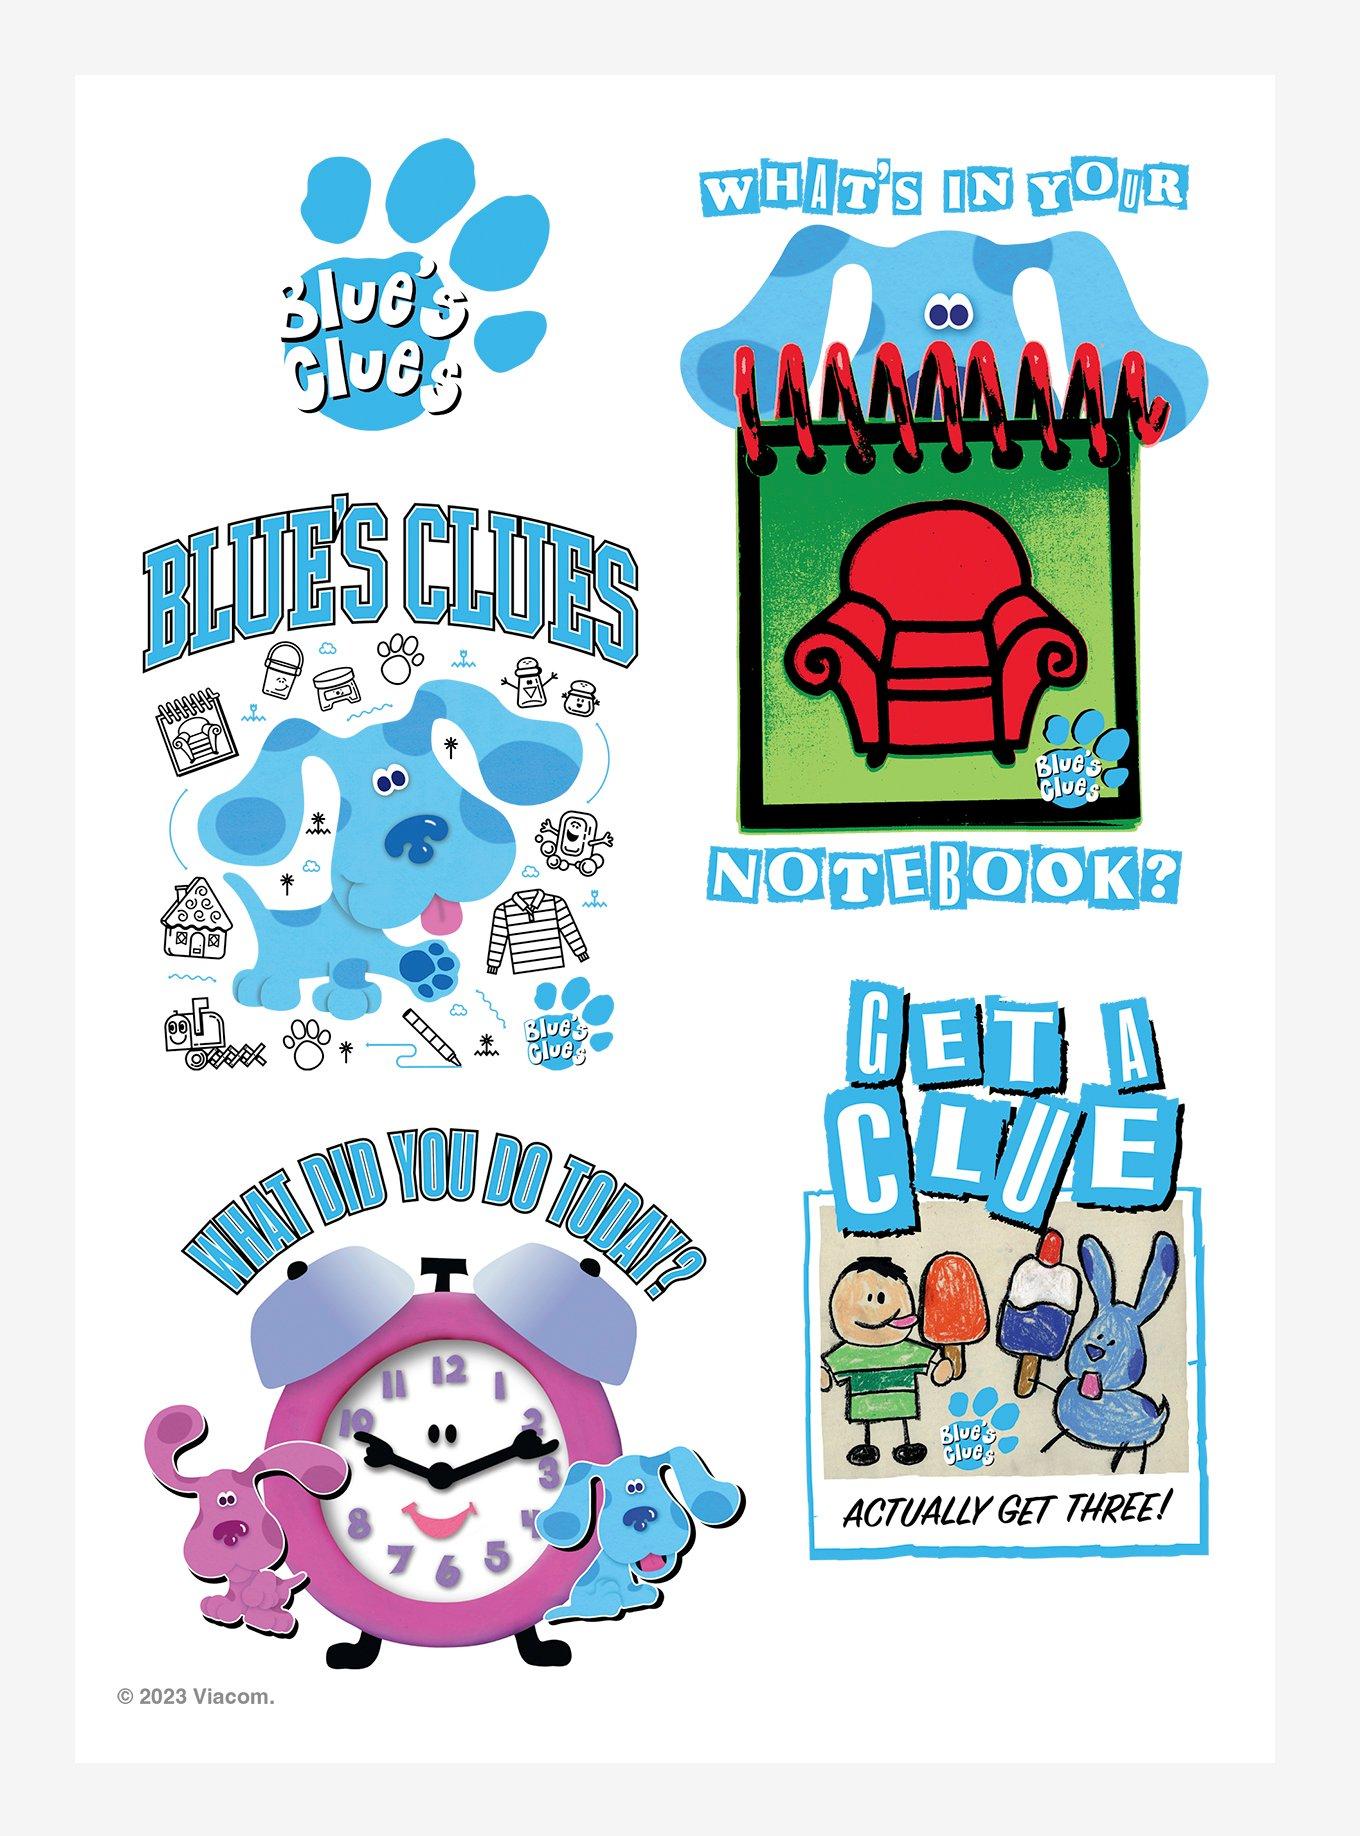 Blue's Clues What's In Your Notebook Kiss-Cut Sticker Sheet